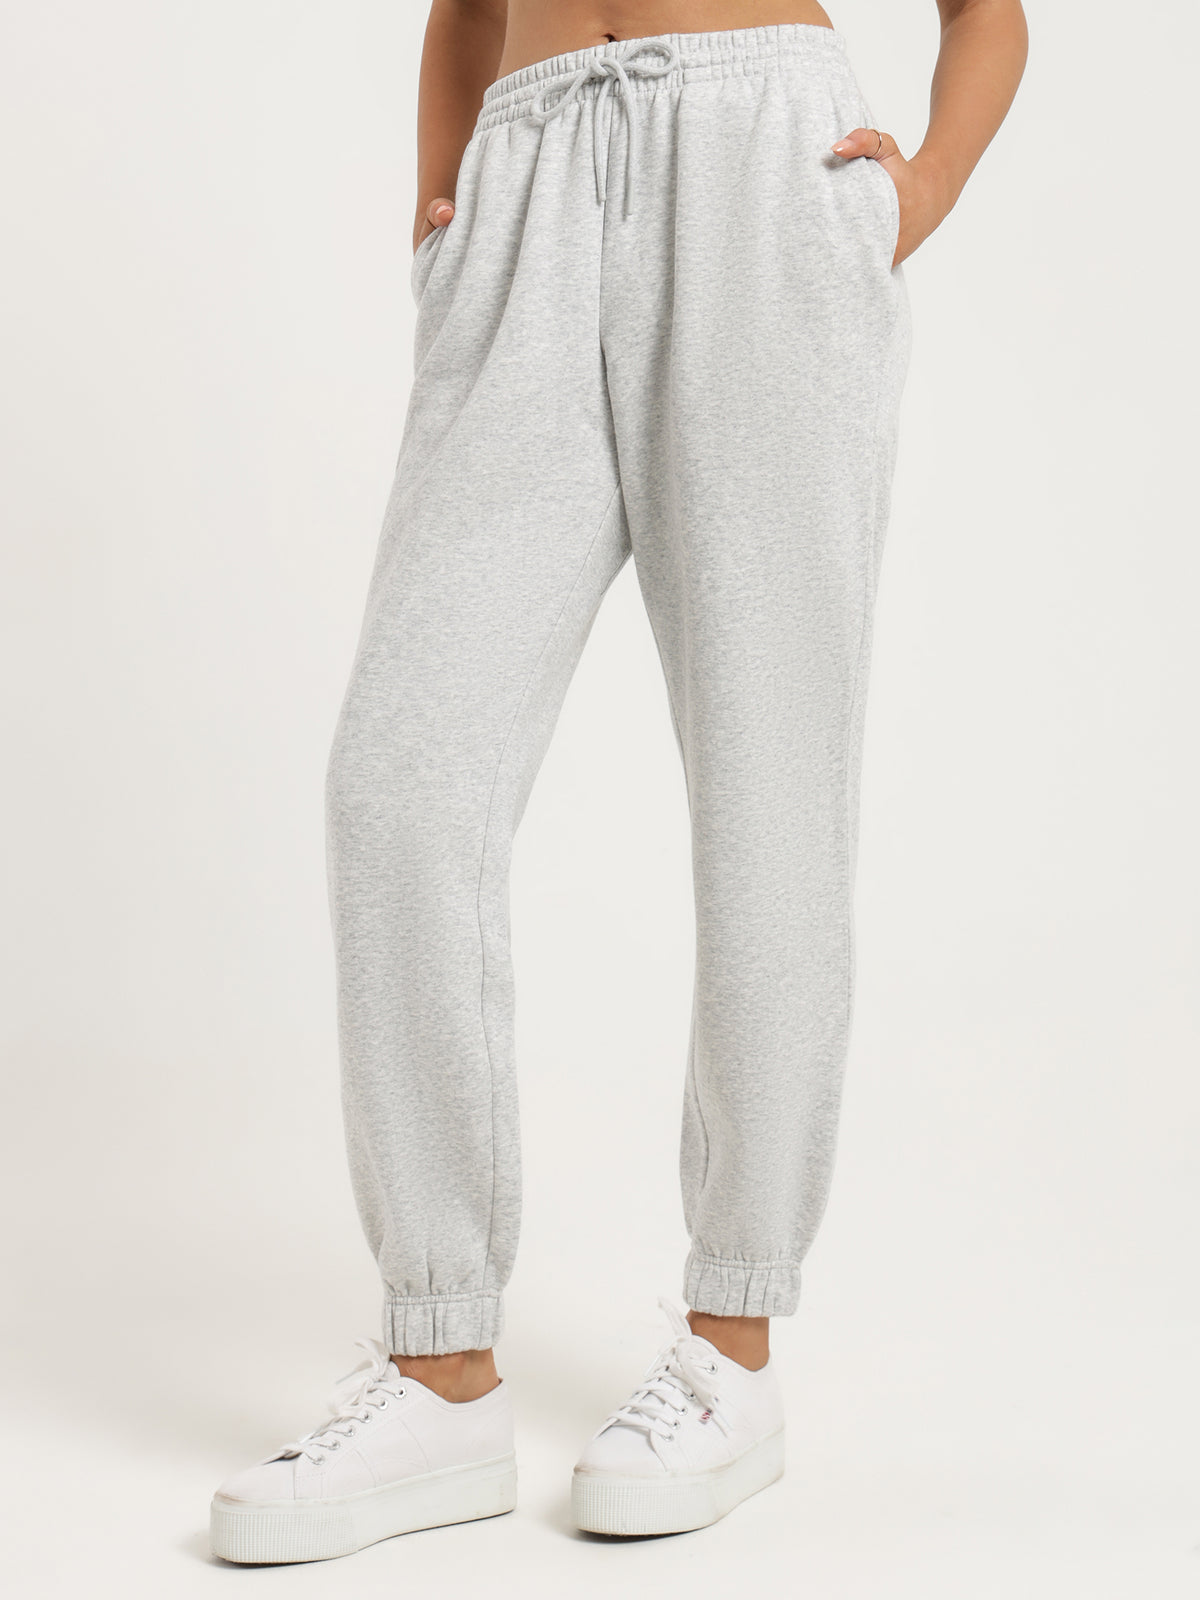 Carter Curated Trackpants in Grey Marle